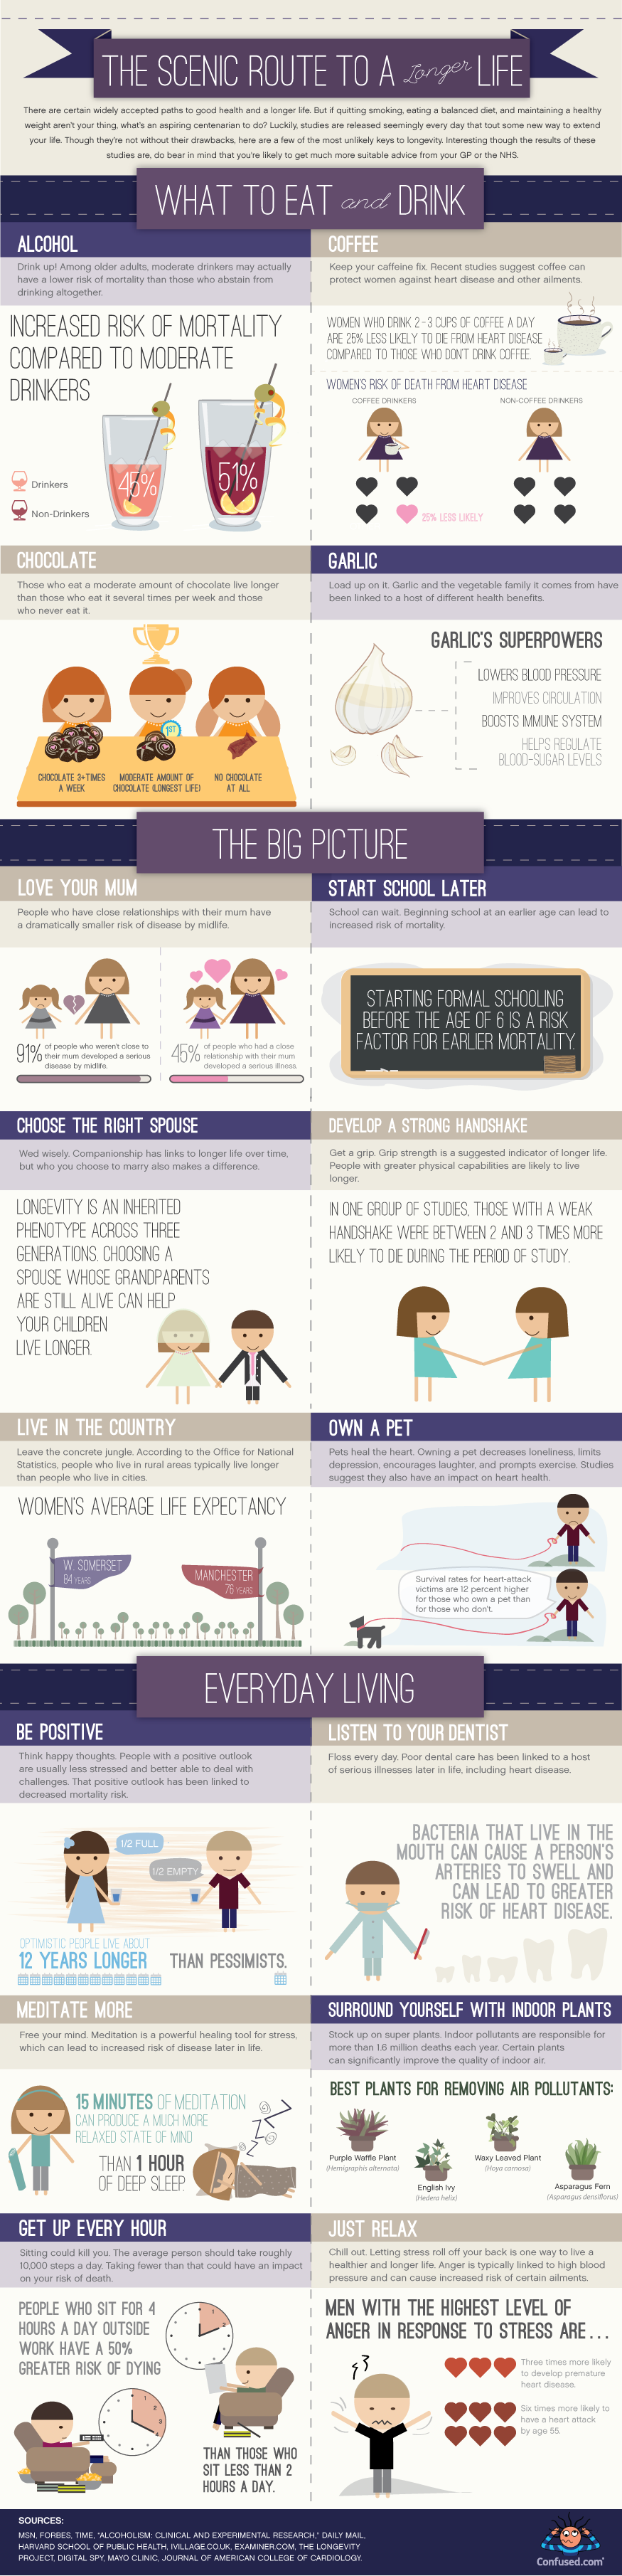 Longevity Tips for Office Workers [INFOGRAPHIC]